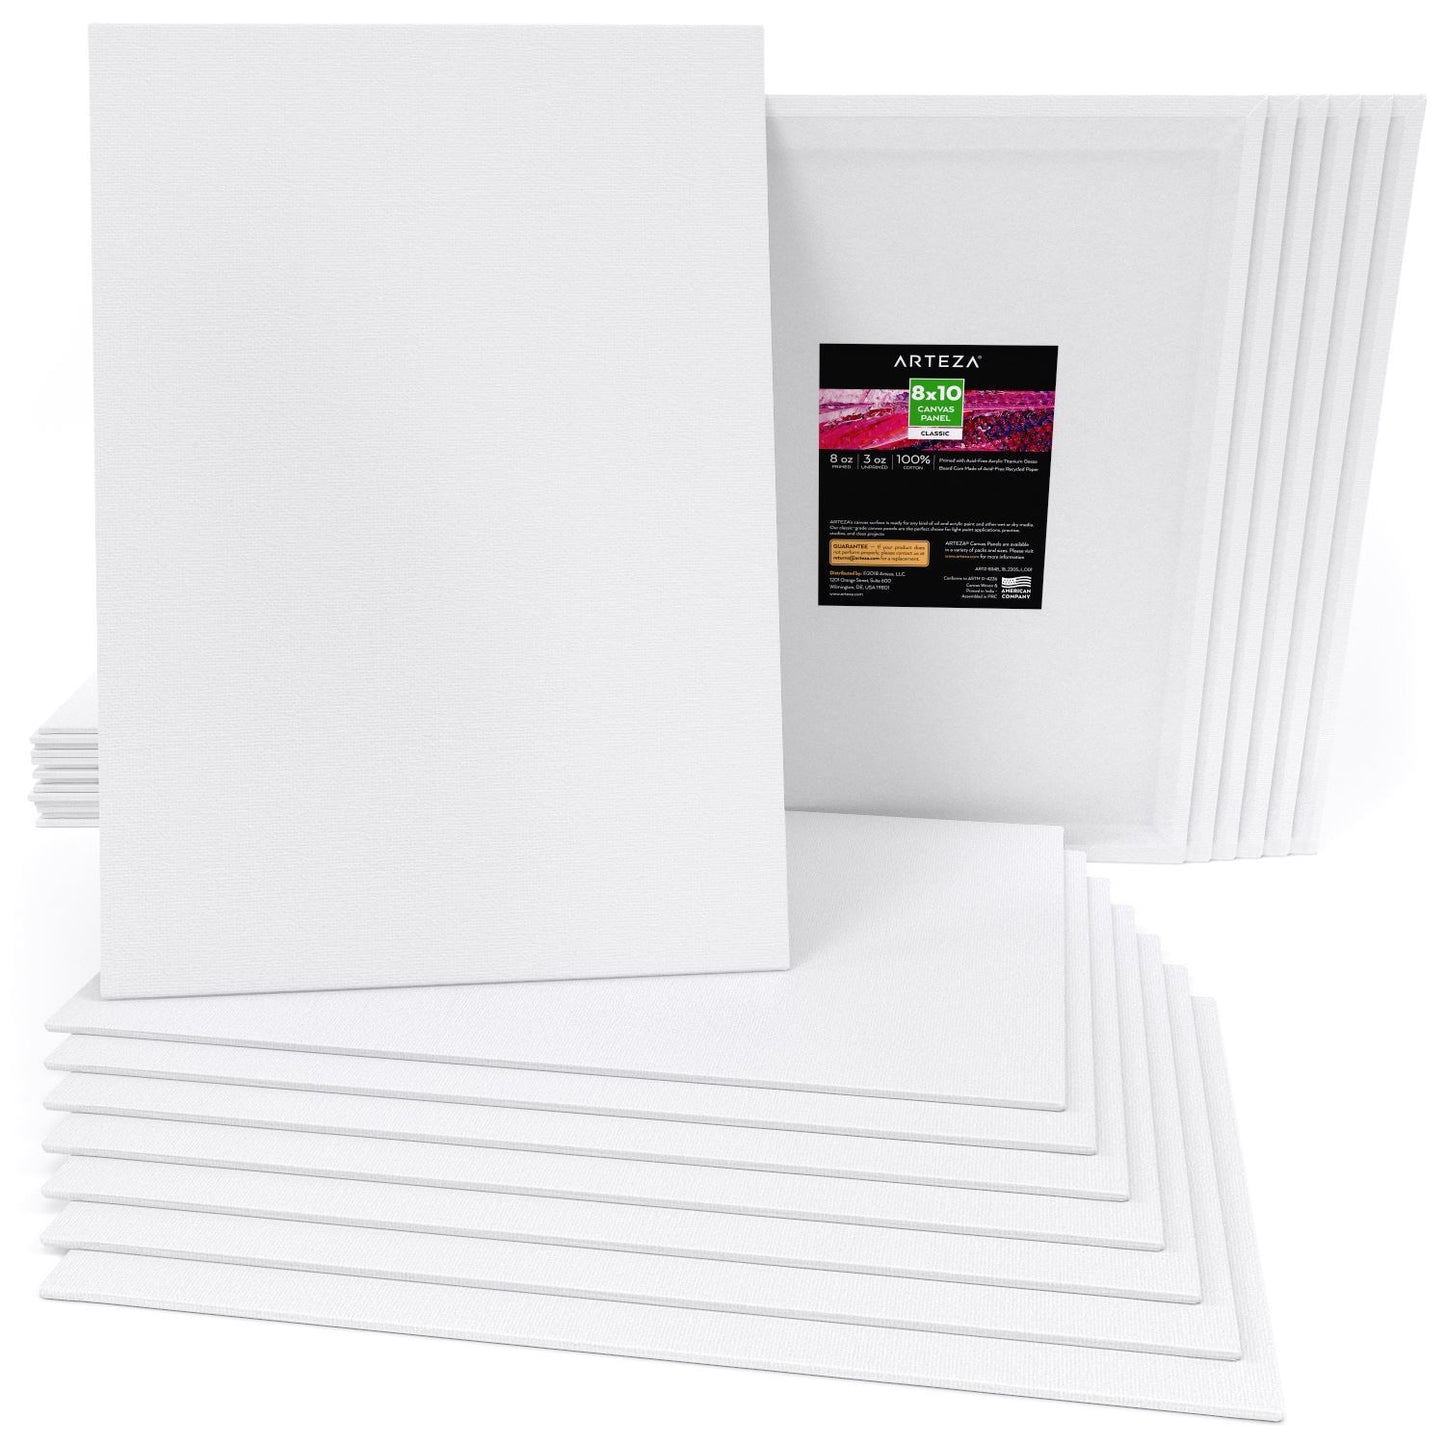 Classic Canvas Panels, 8" x 10" - Pack of 28